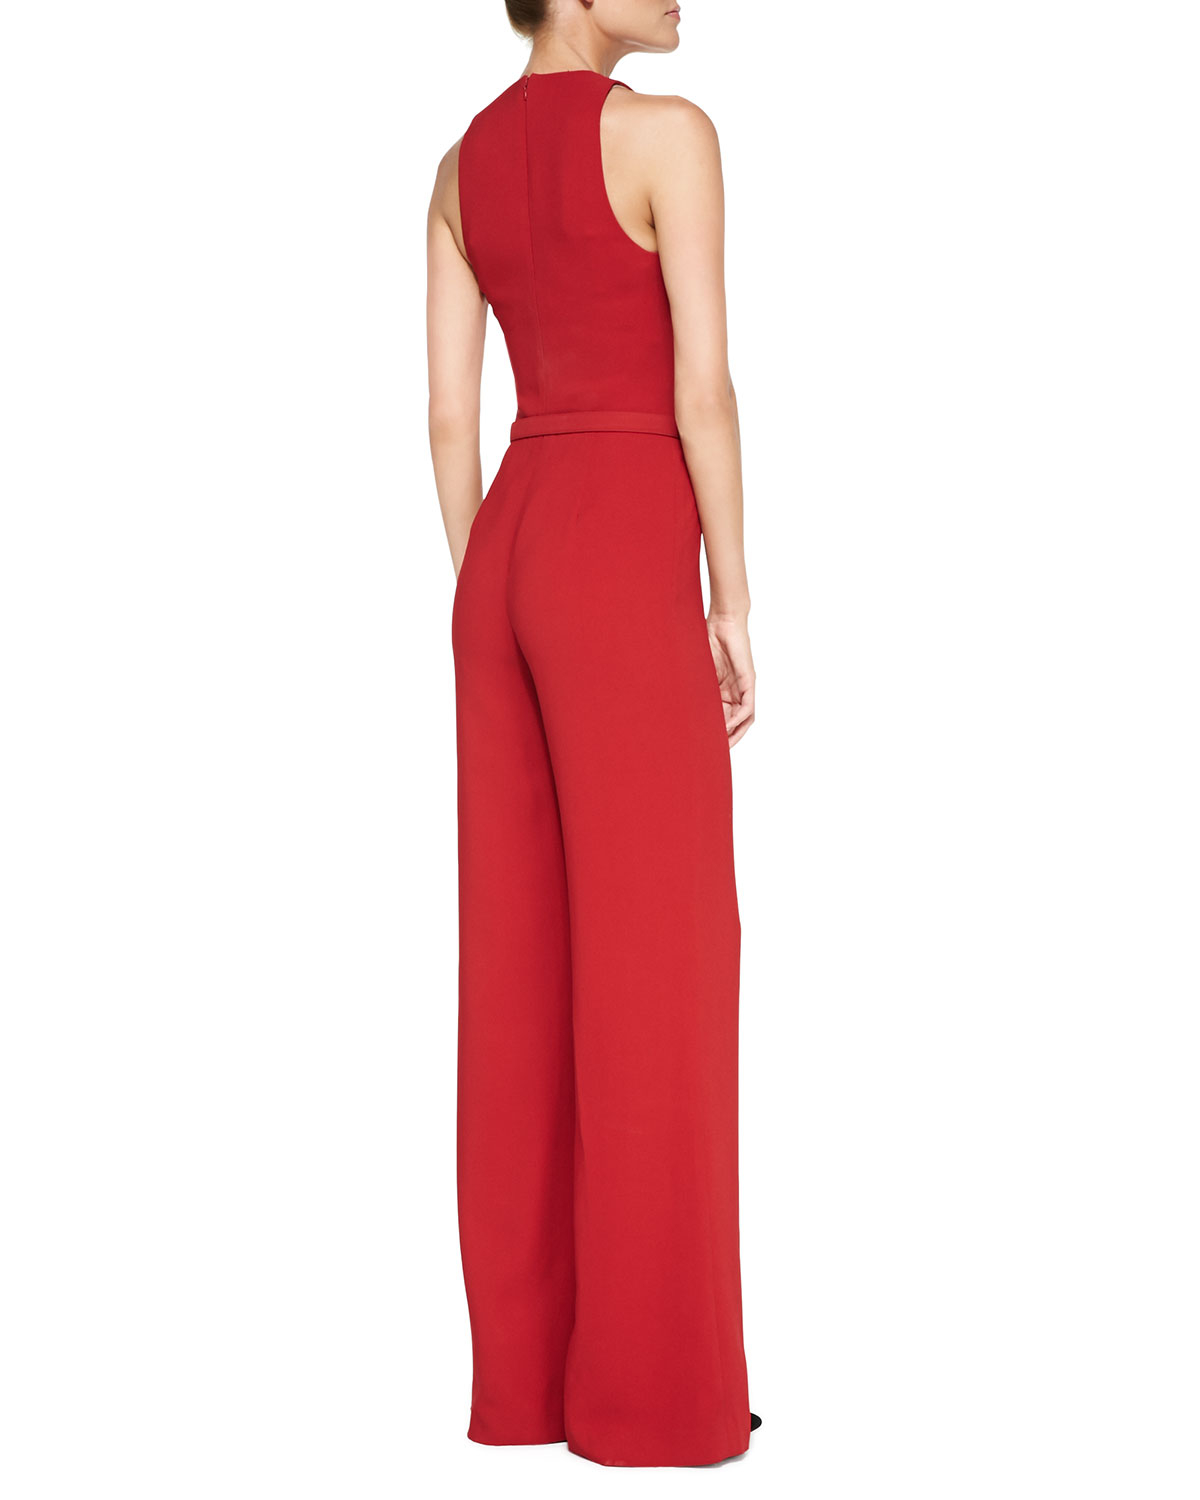 Lyst - Ralph lauren black label Charisse Sleeveless Belted Jumpsuit in Red